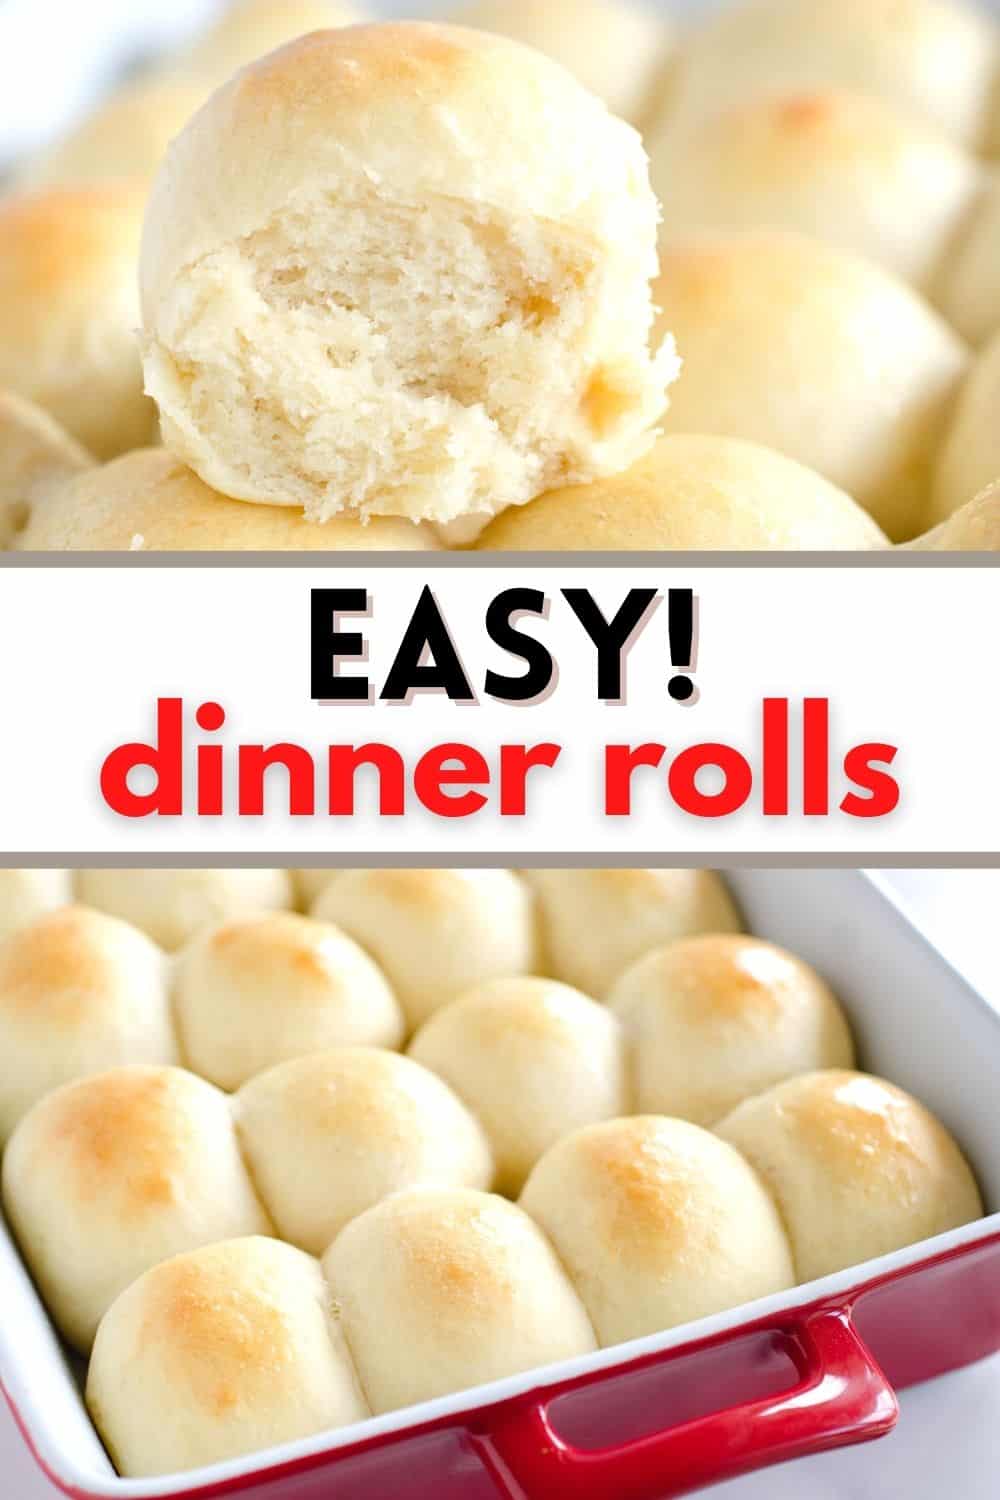 With this quick yeast rolls recipe, you can have yeast dinner rolls ready in one hour!  These easy dinner rolls are buttery, fluffy, and so wonderful!